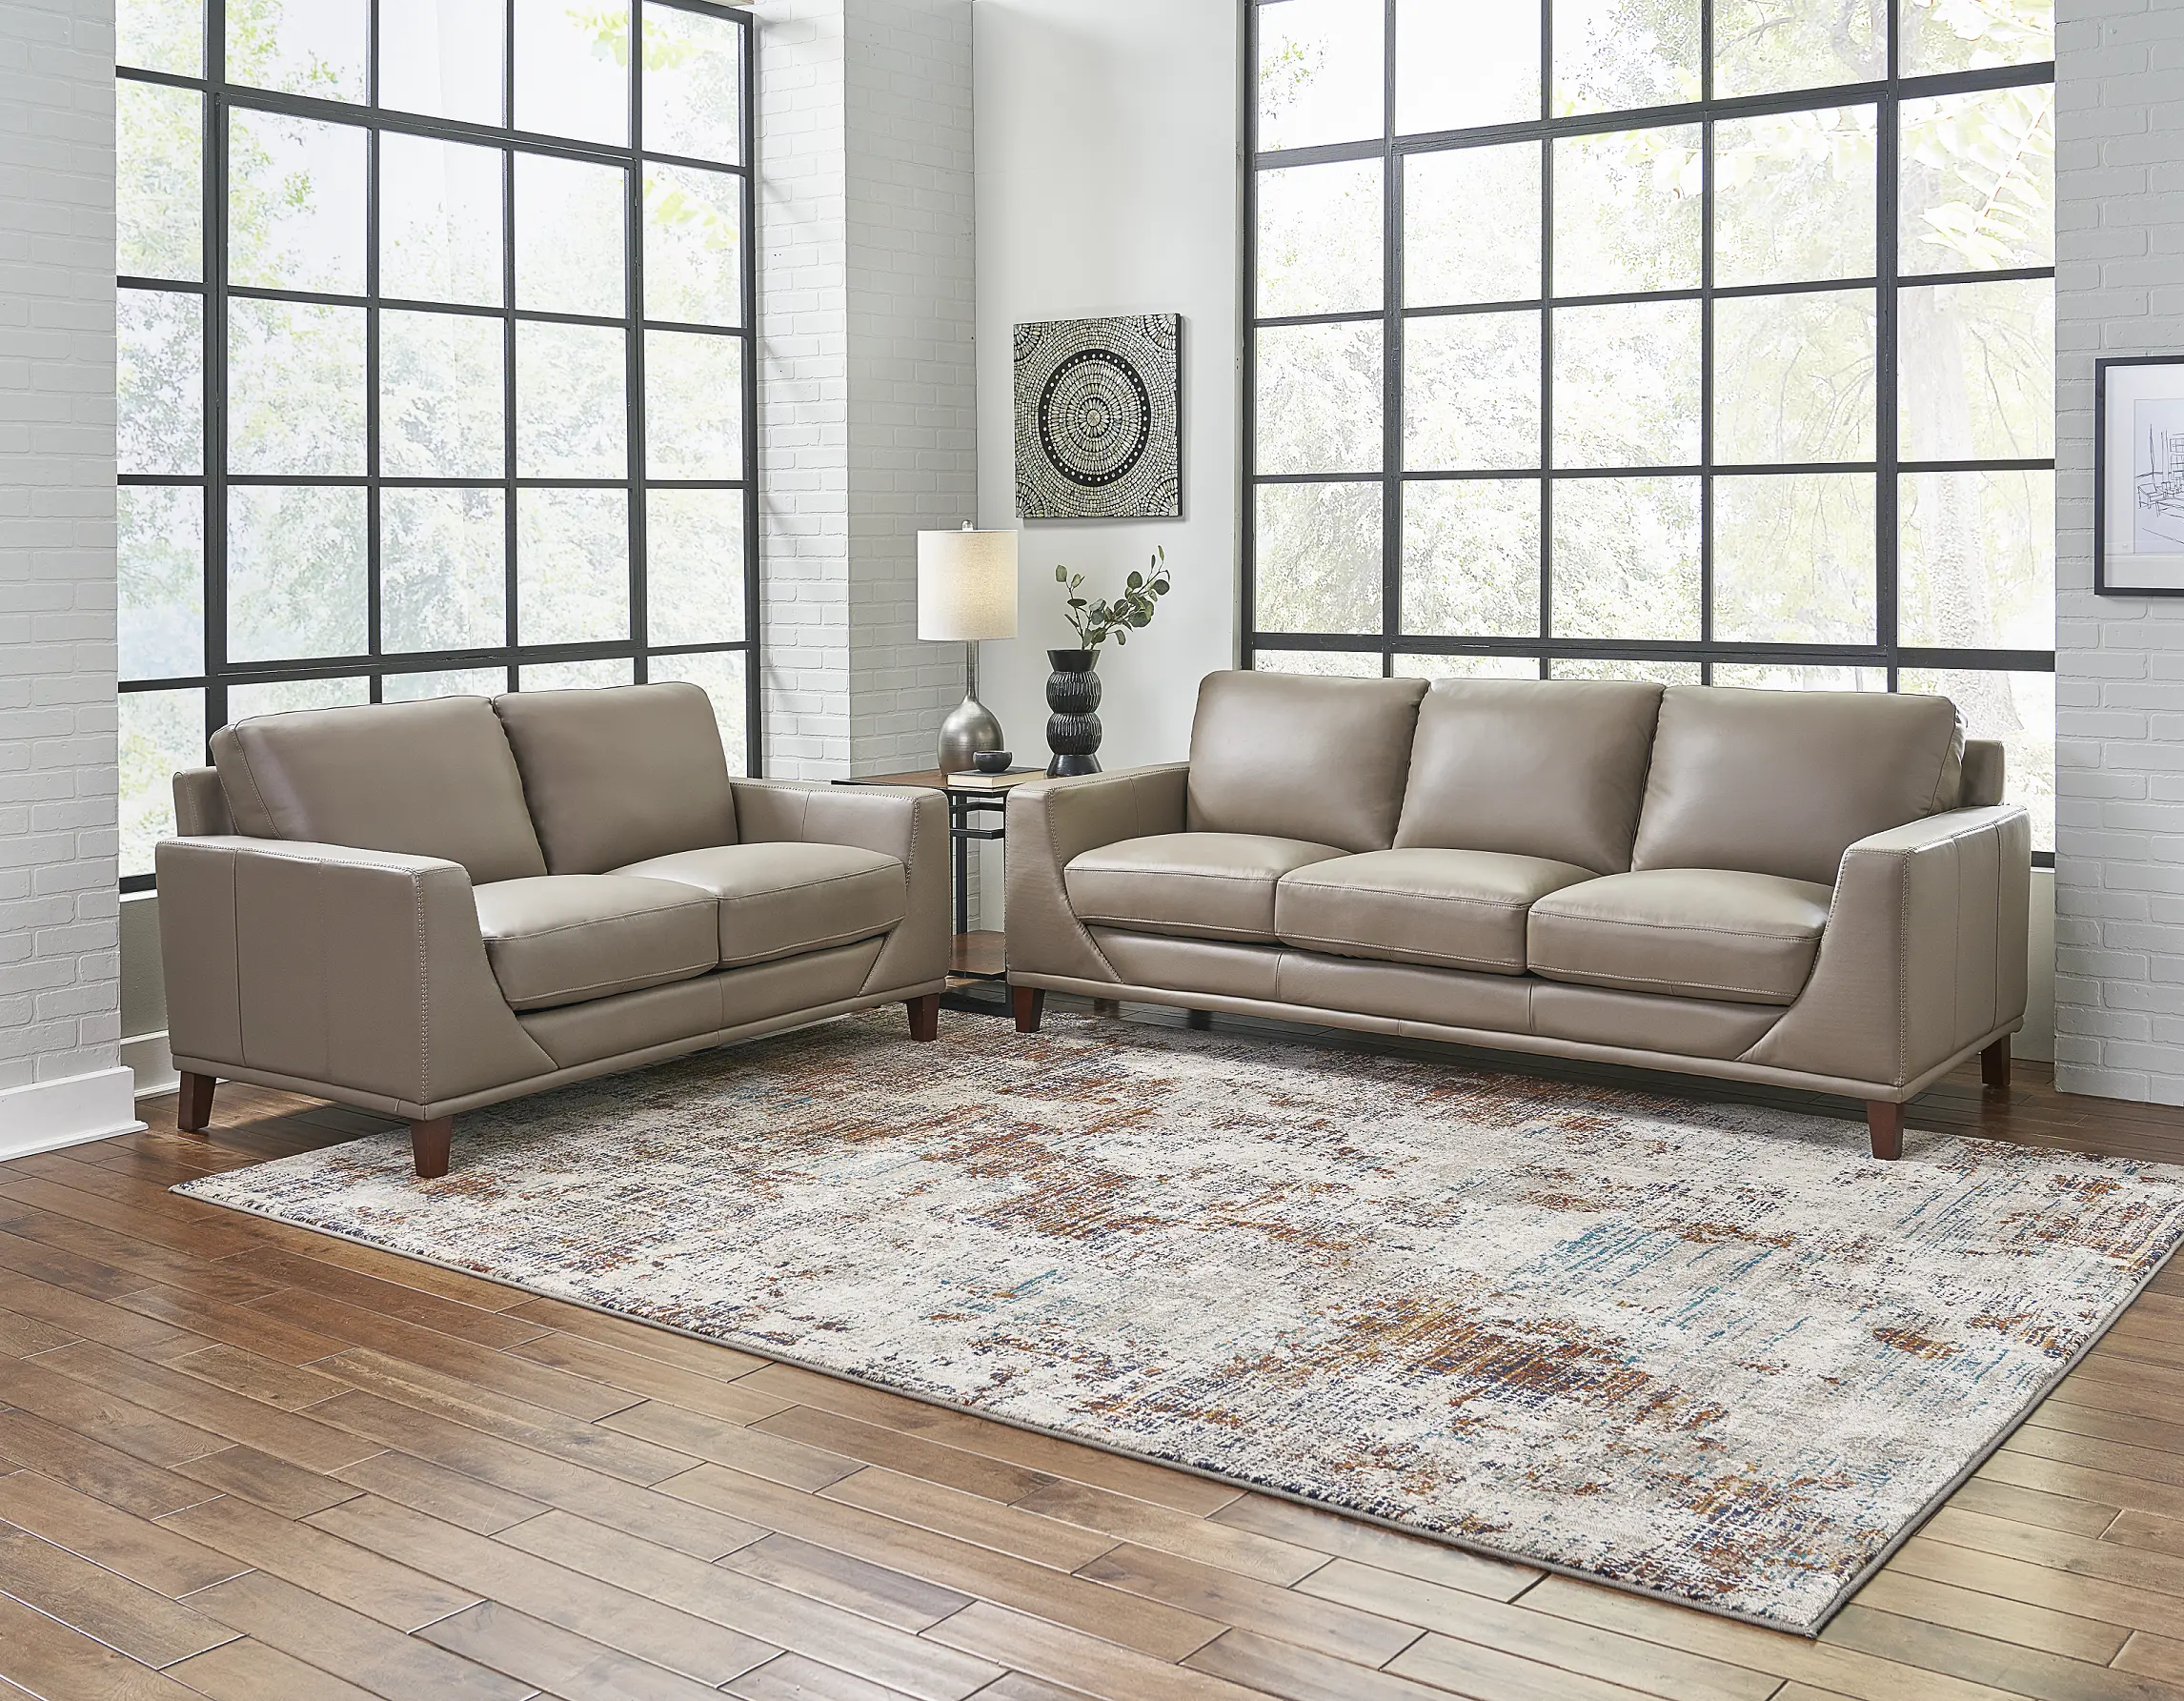 Sonoma Taupe Leather 2 Piece Sofa and Loveseat Set